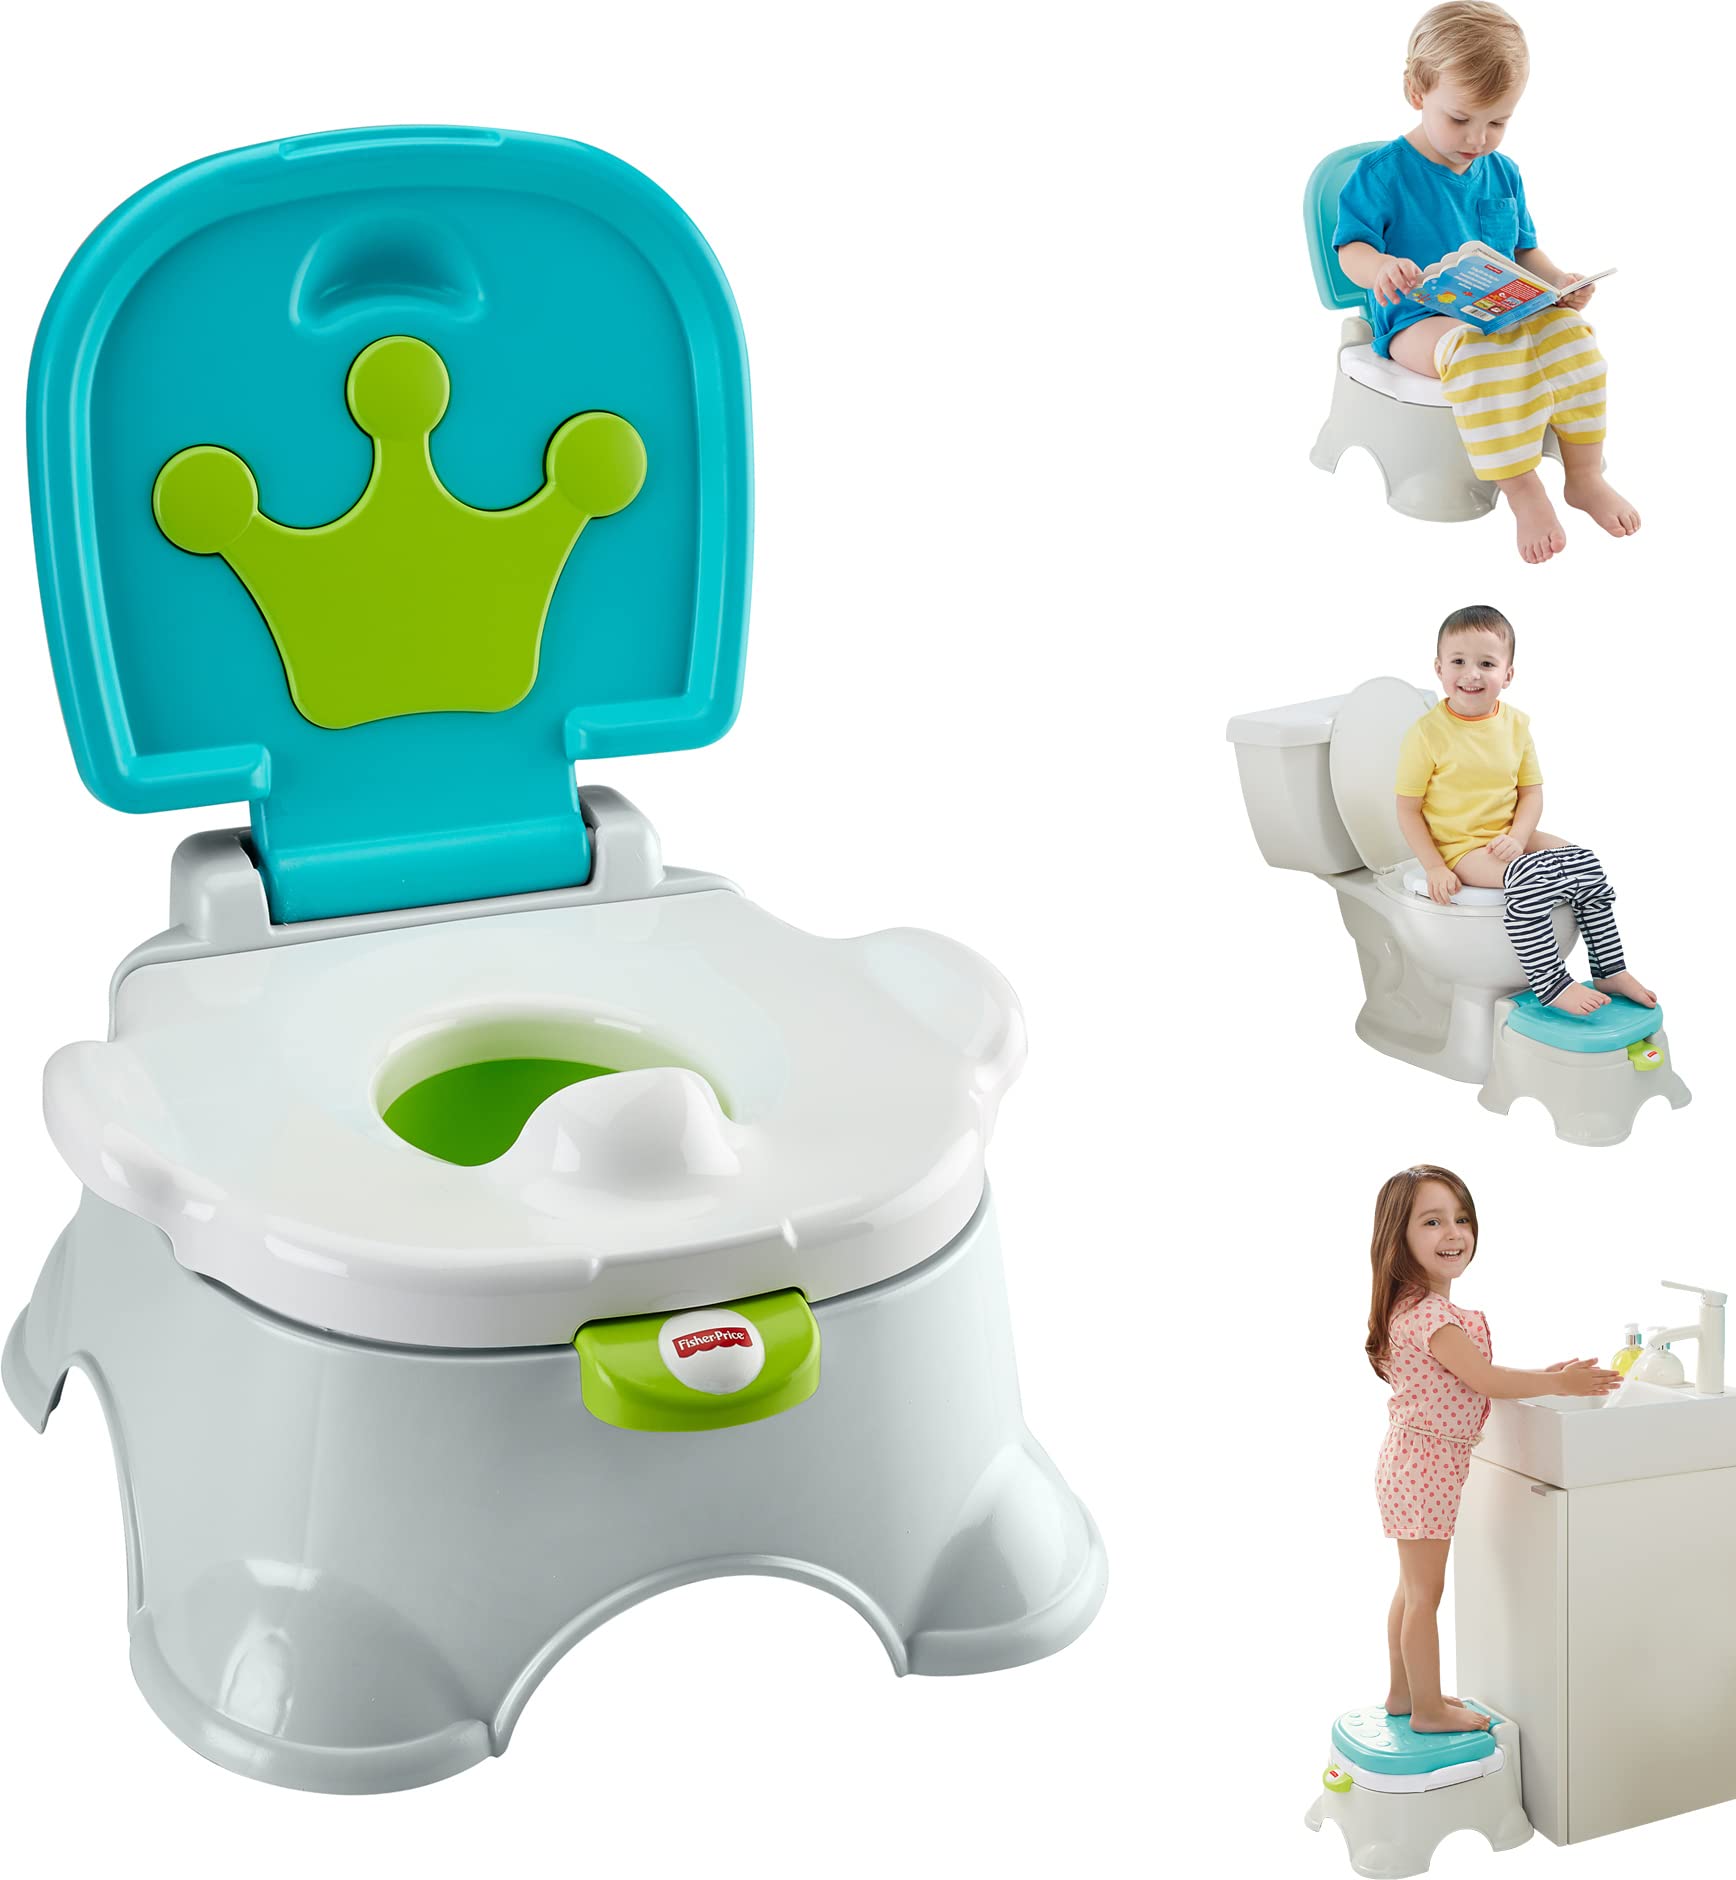 baby toilet seat with music High quality baby toilet seat cover toilet seats for baby